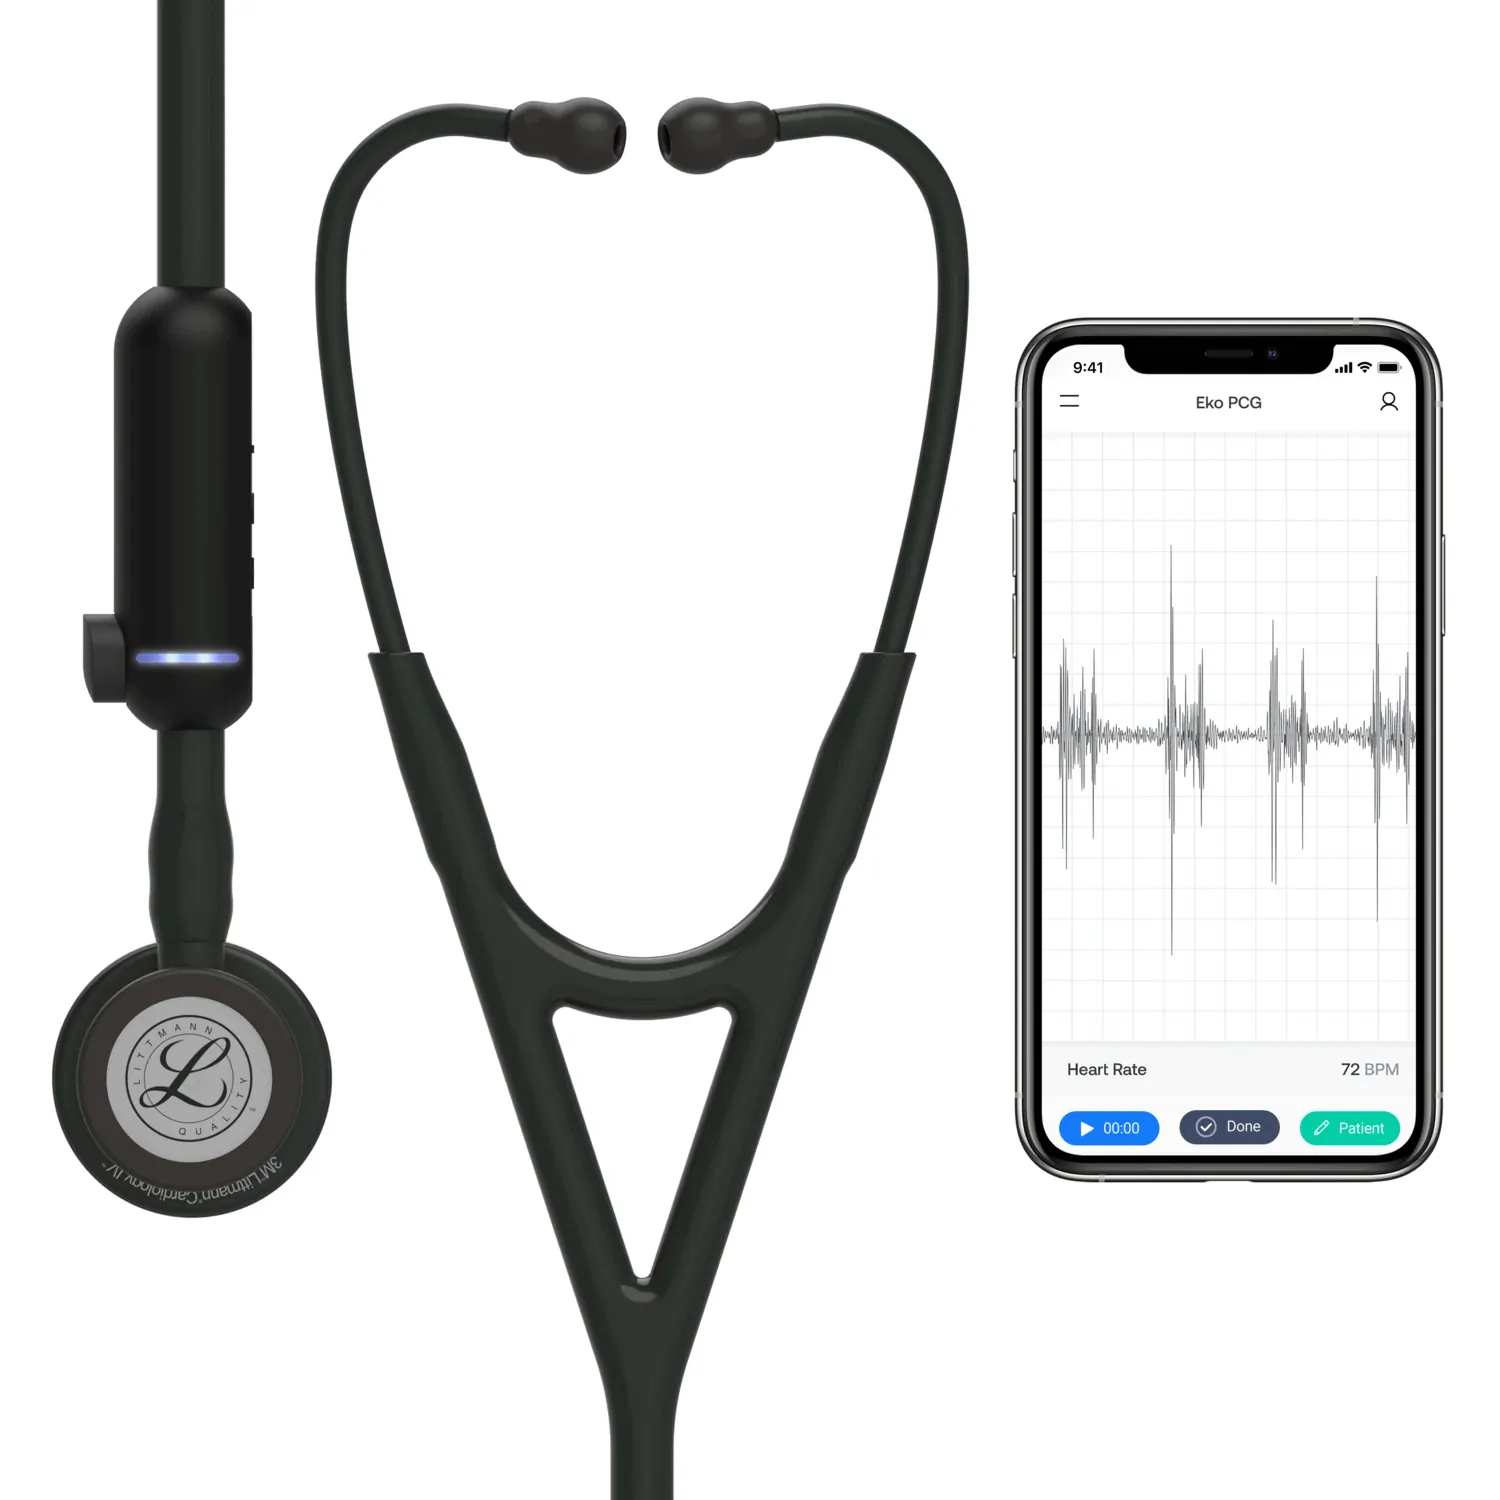 The Best Stethoscope For Nurses - The Ultimate Guide to Nurse Stethoscopes - 3M Littmann CORE Stethoscope 8480 05 digital compare all HR